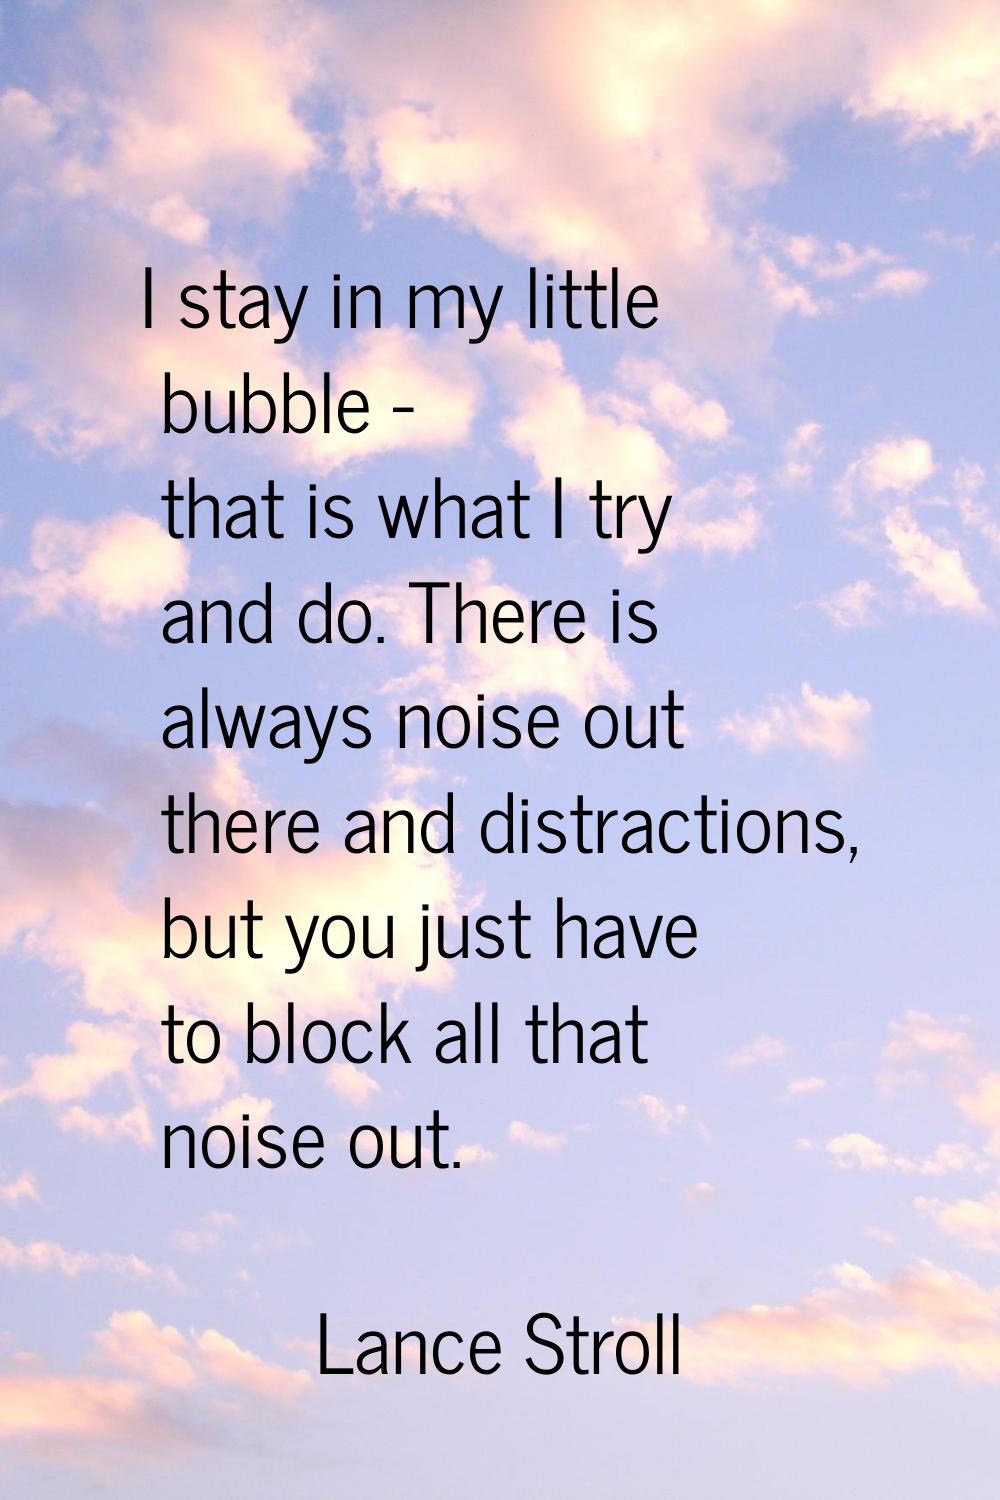 I stay in my little bubble - that is what I try and do. There is always noise out there and distrac